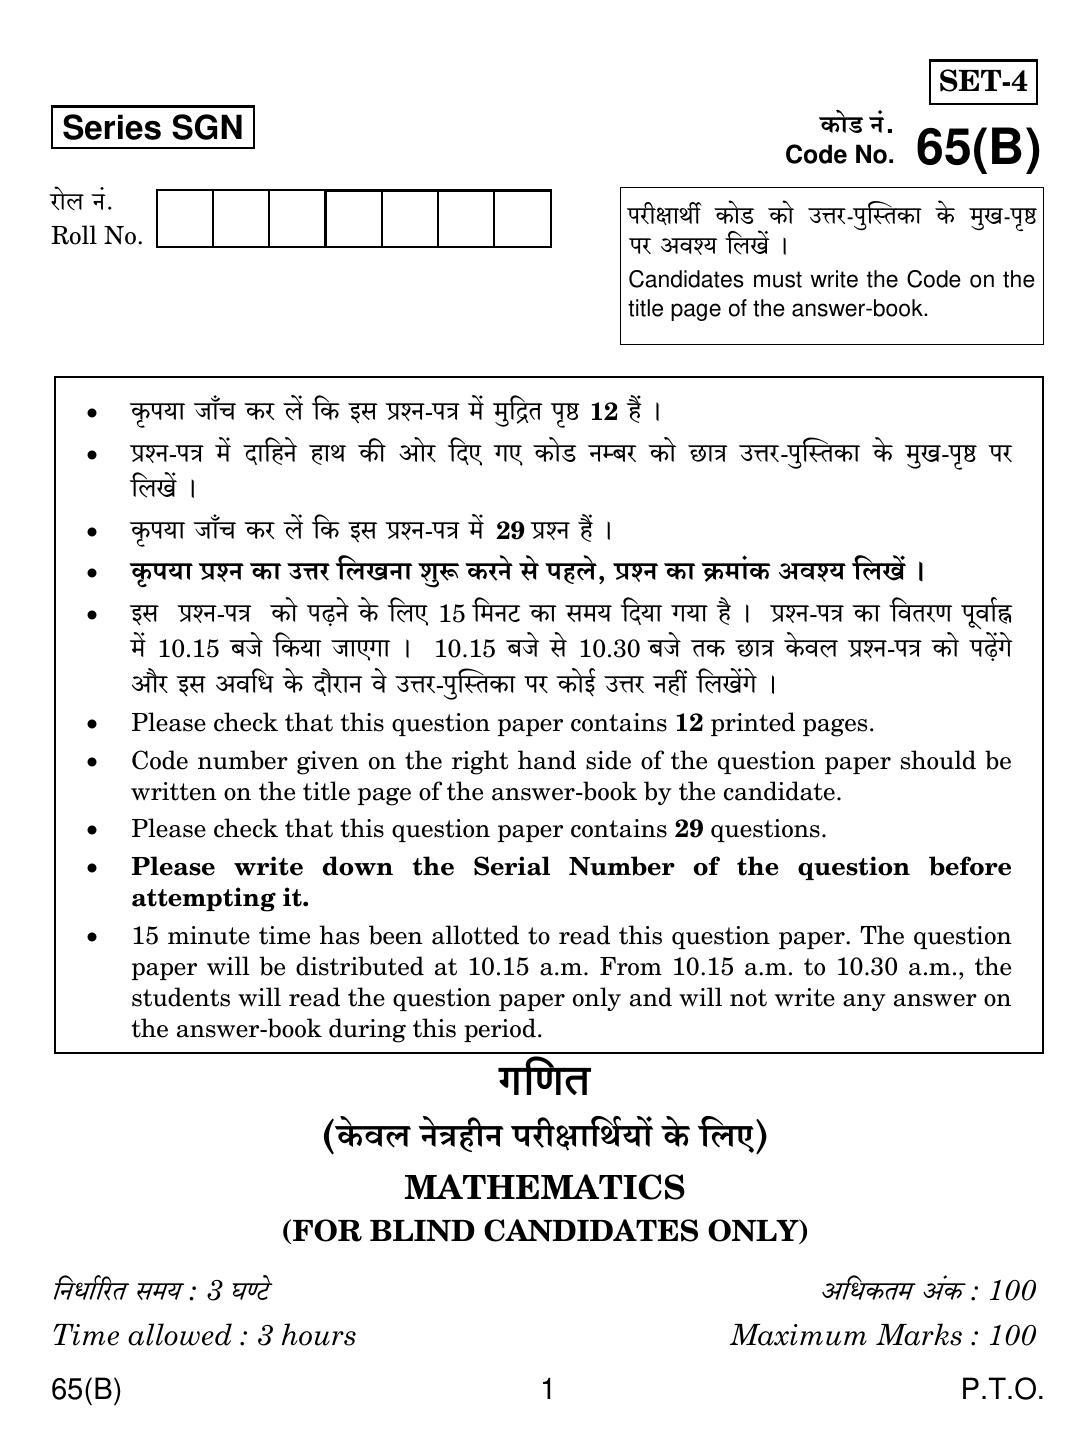 CBSE Class 12 65(B) MATHS FOR BLIND CANDIDATES 2018 Question Paper - Page 1